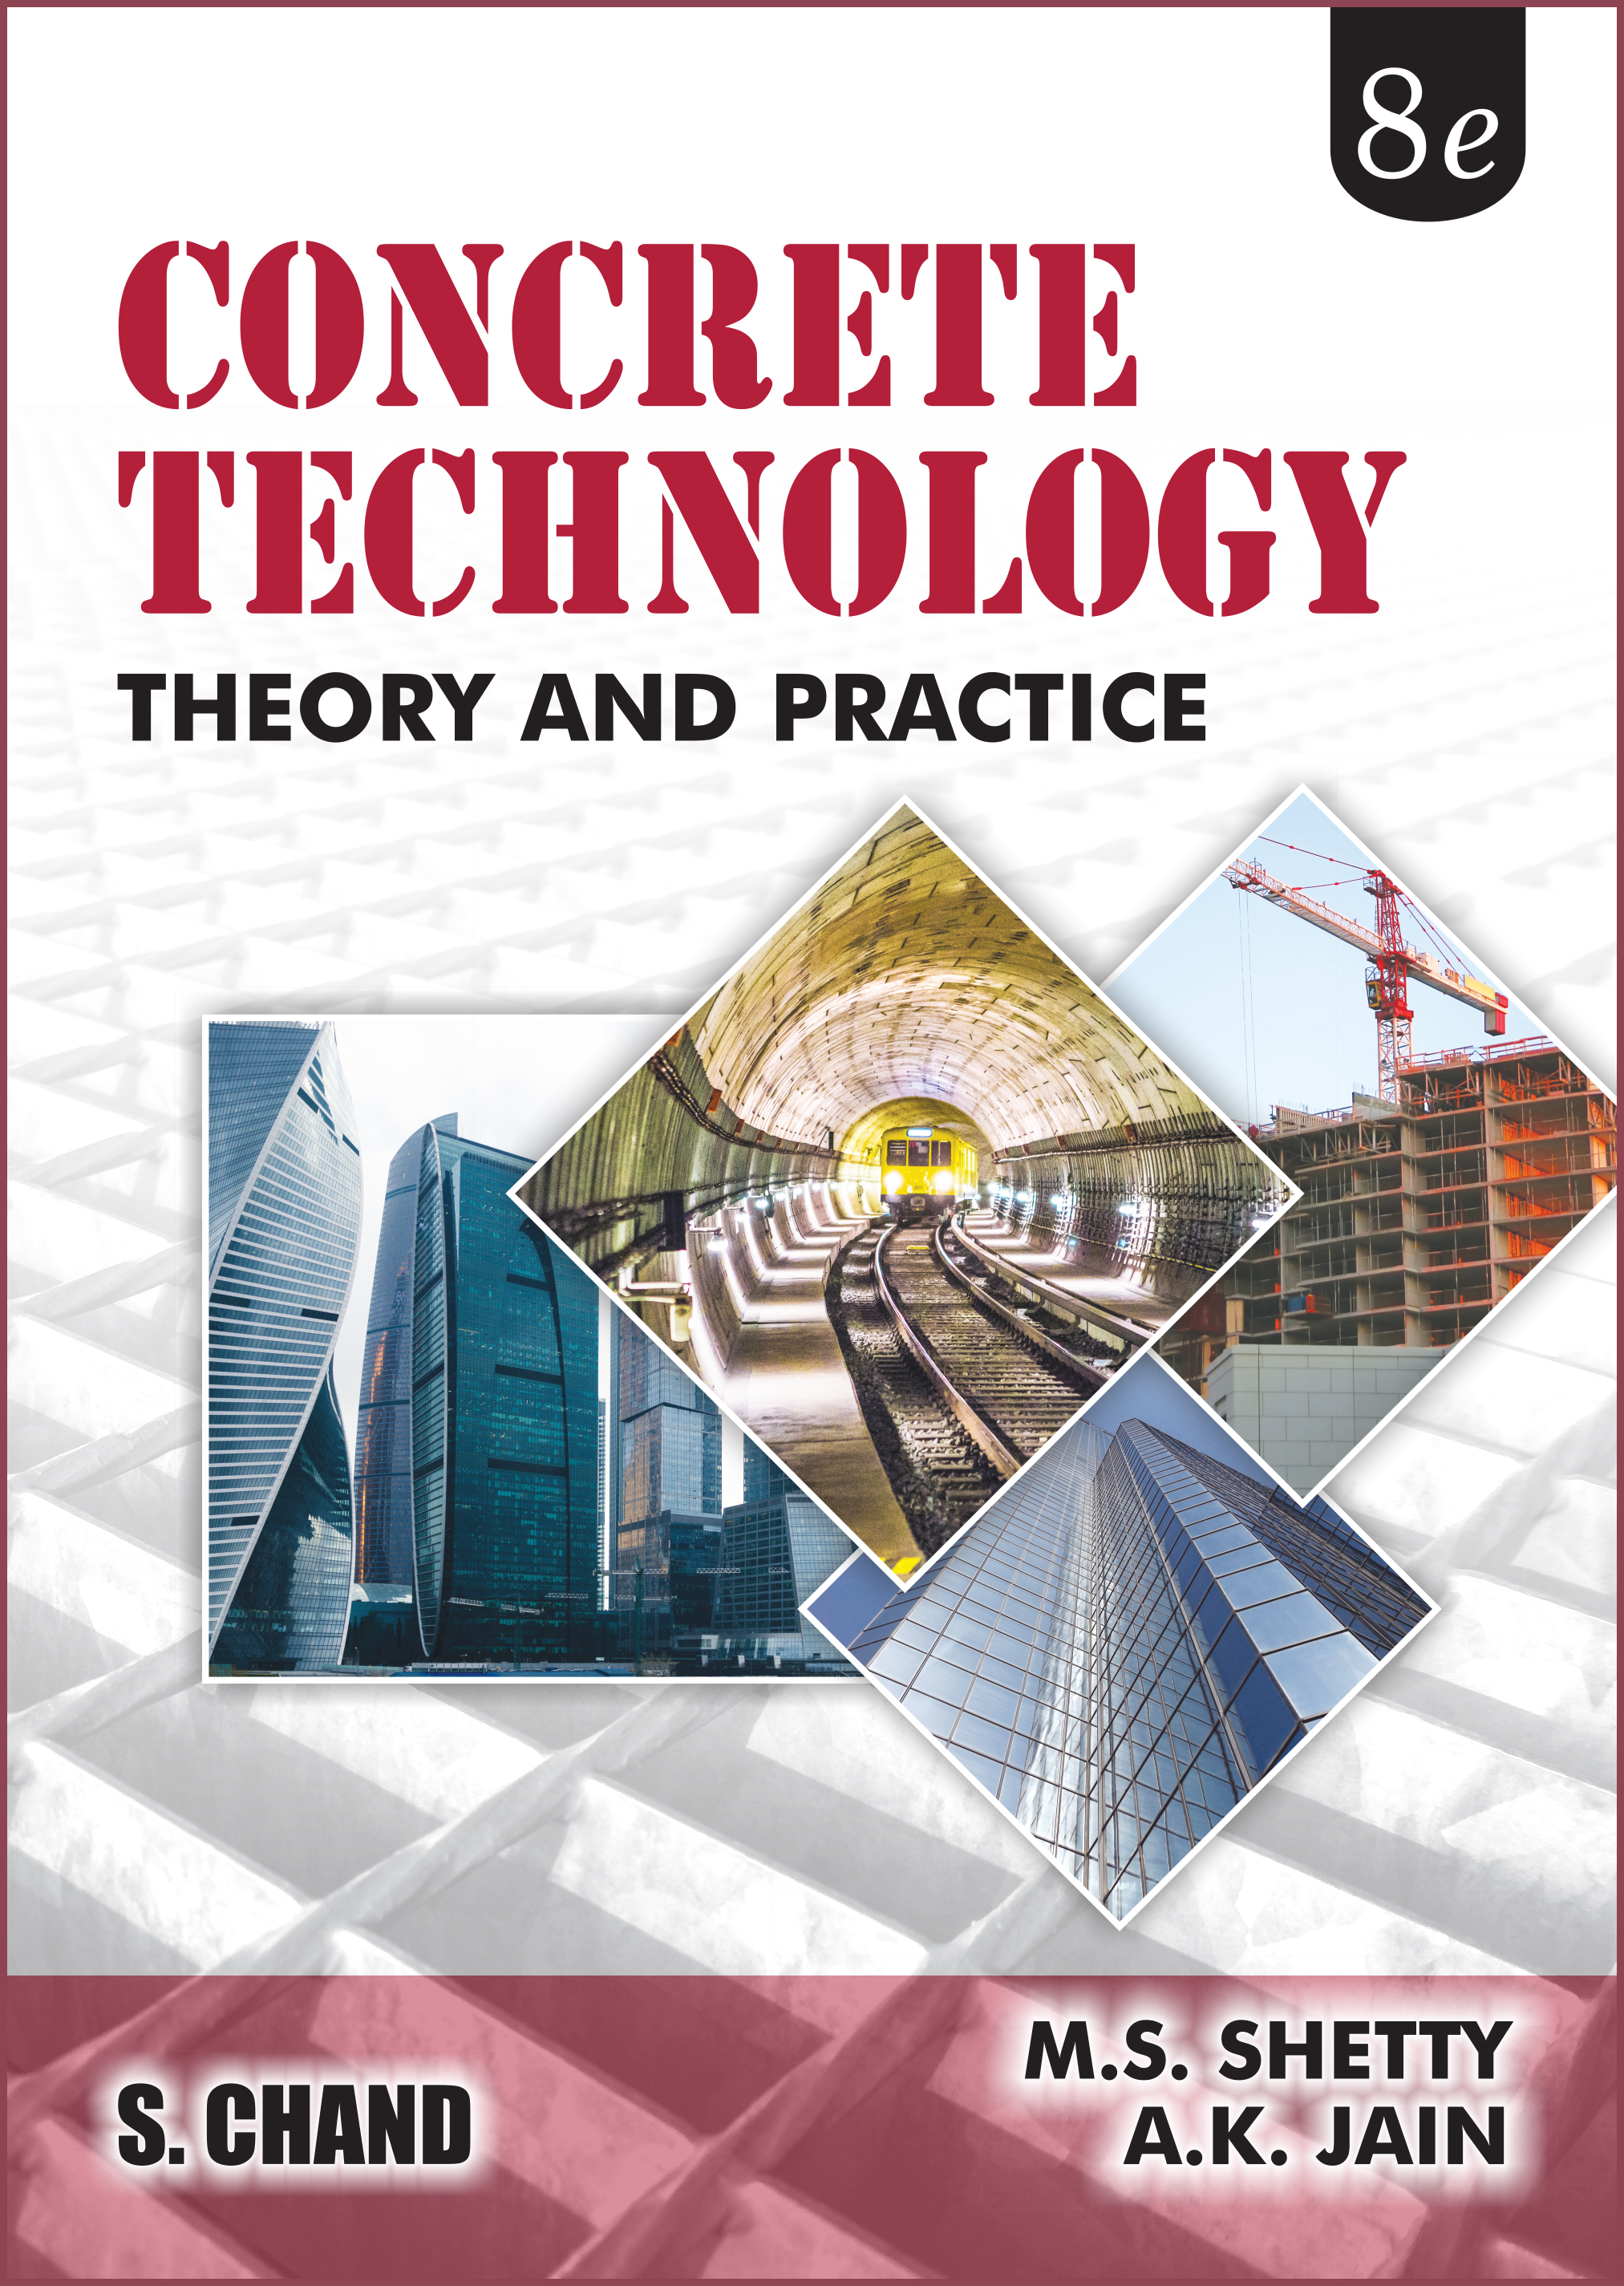 Concrete Technology Theory And Practice By M S Shetty A K